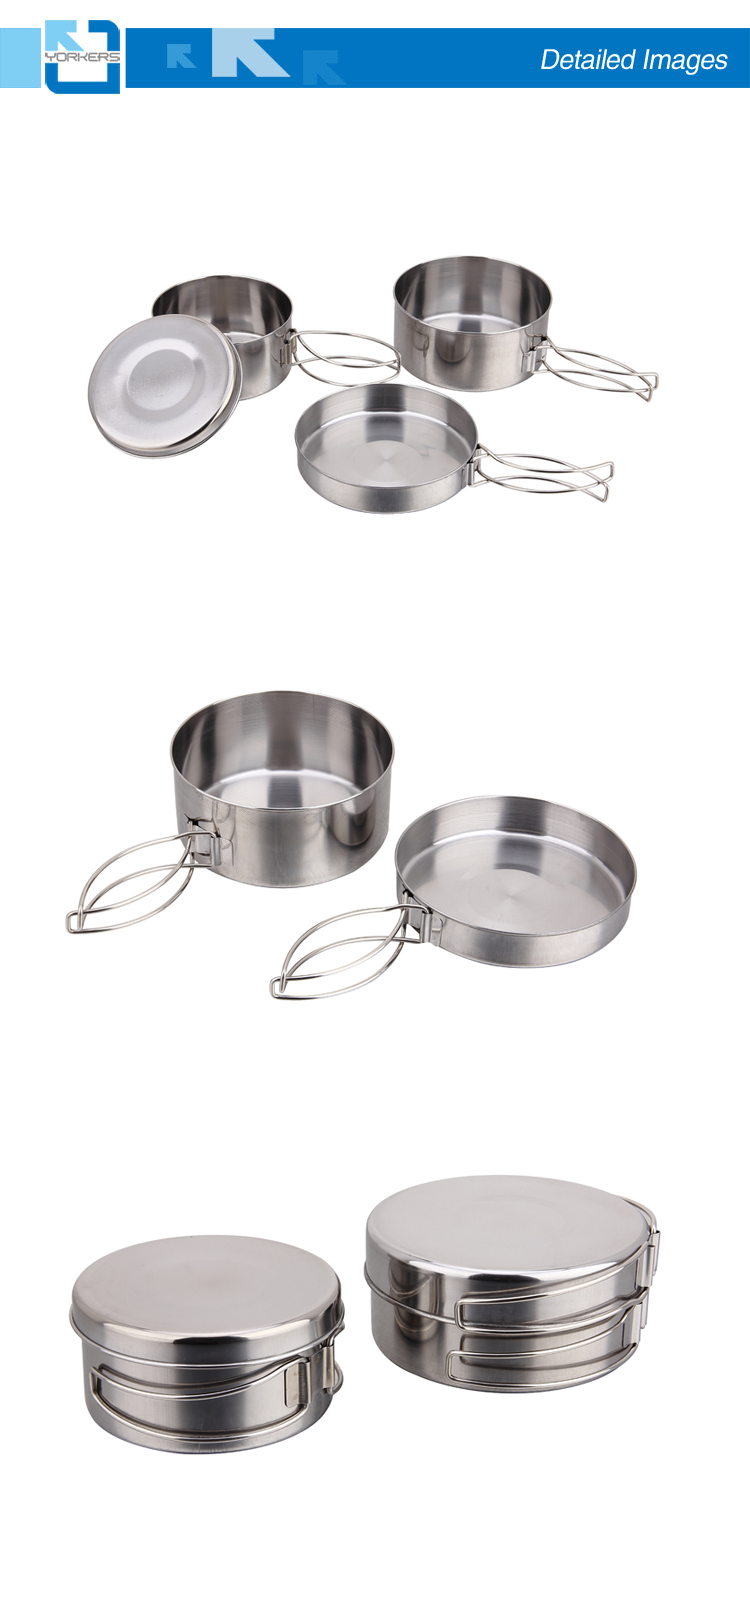 Stainless Steel Pot Pans Camping Cook Set for Picnic